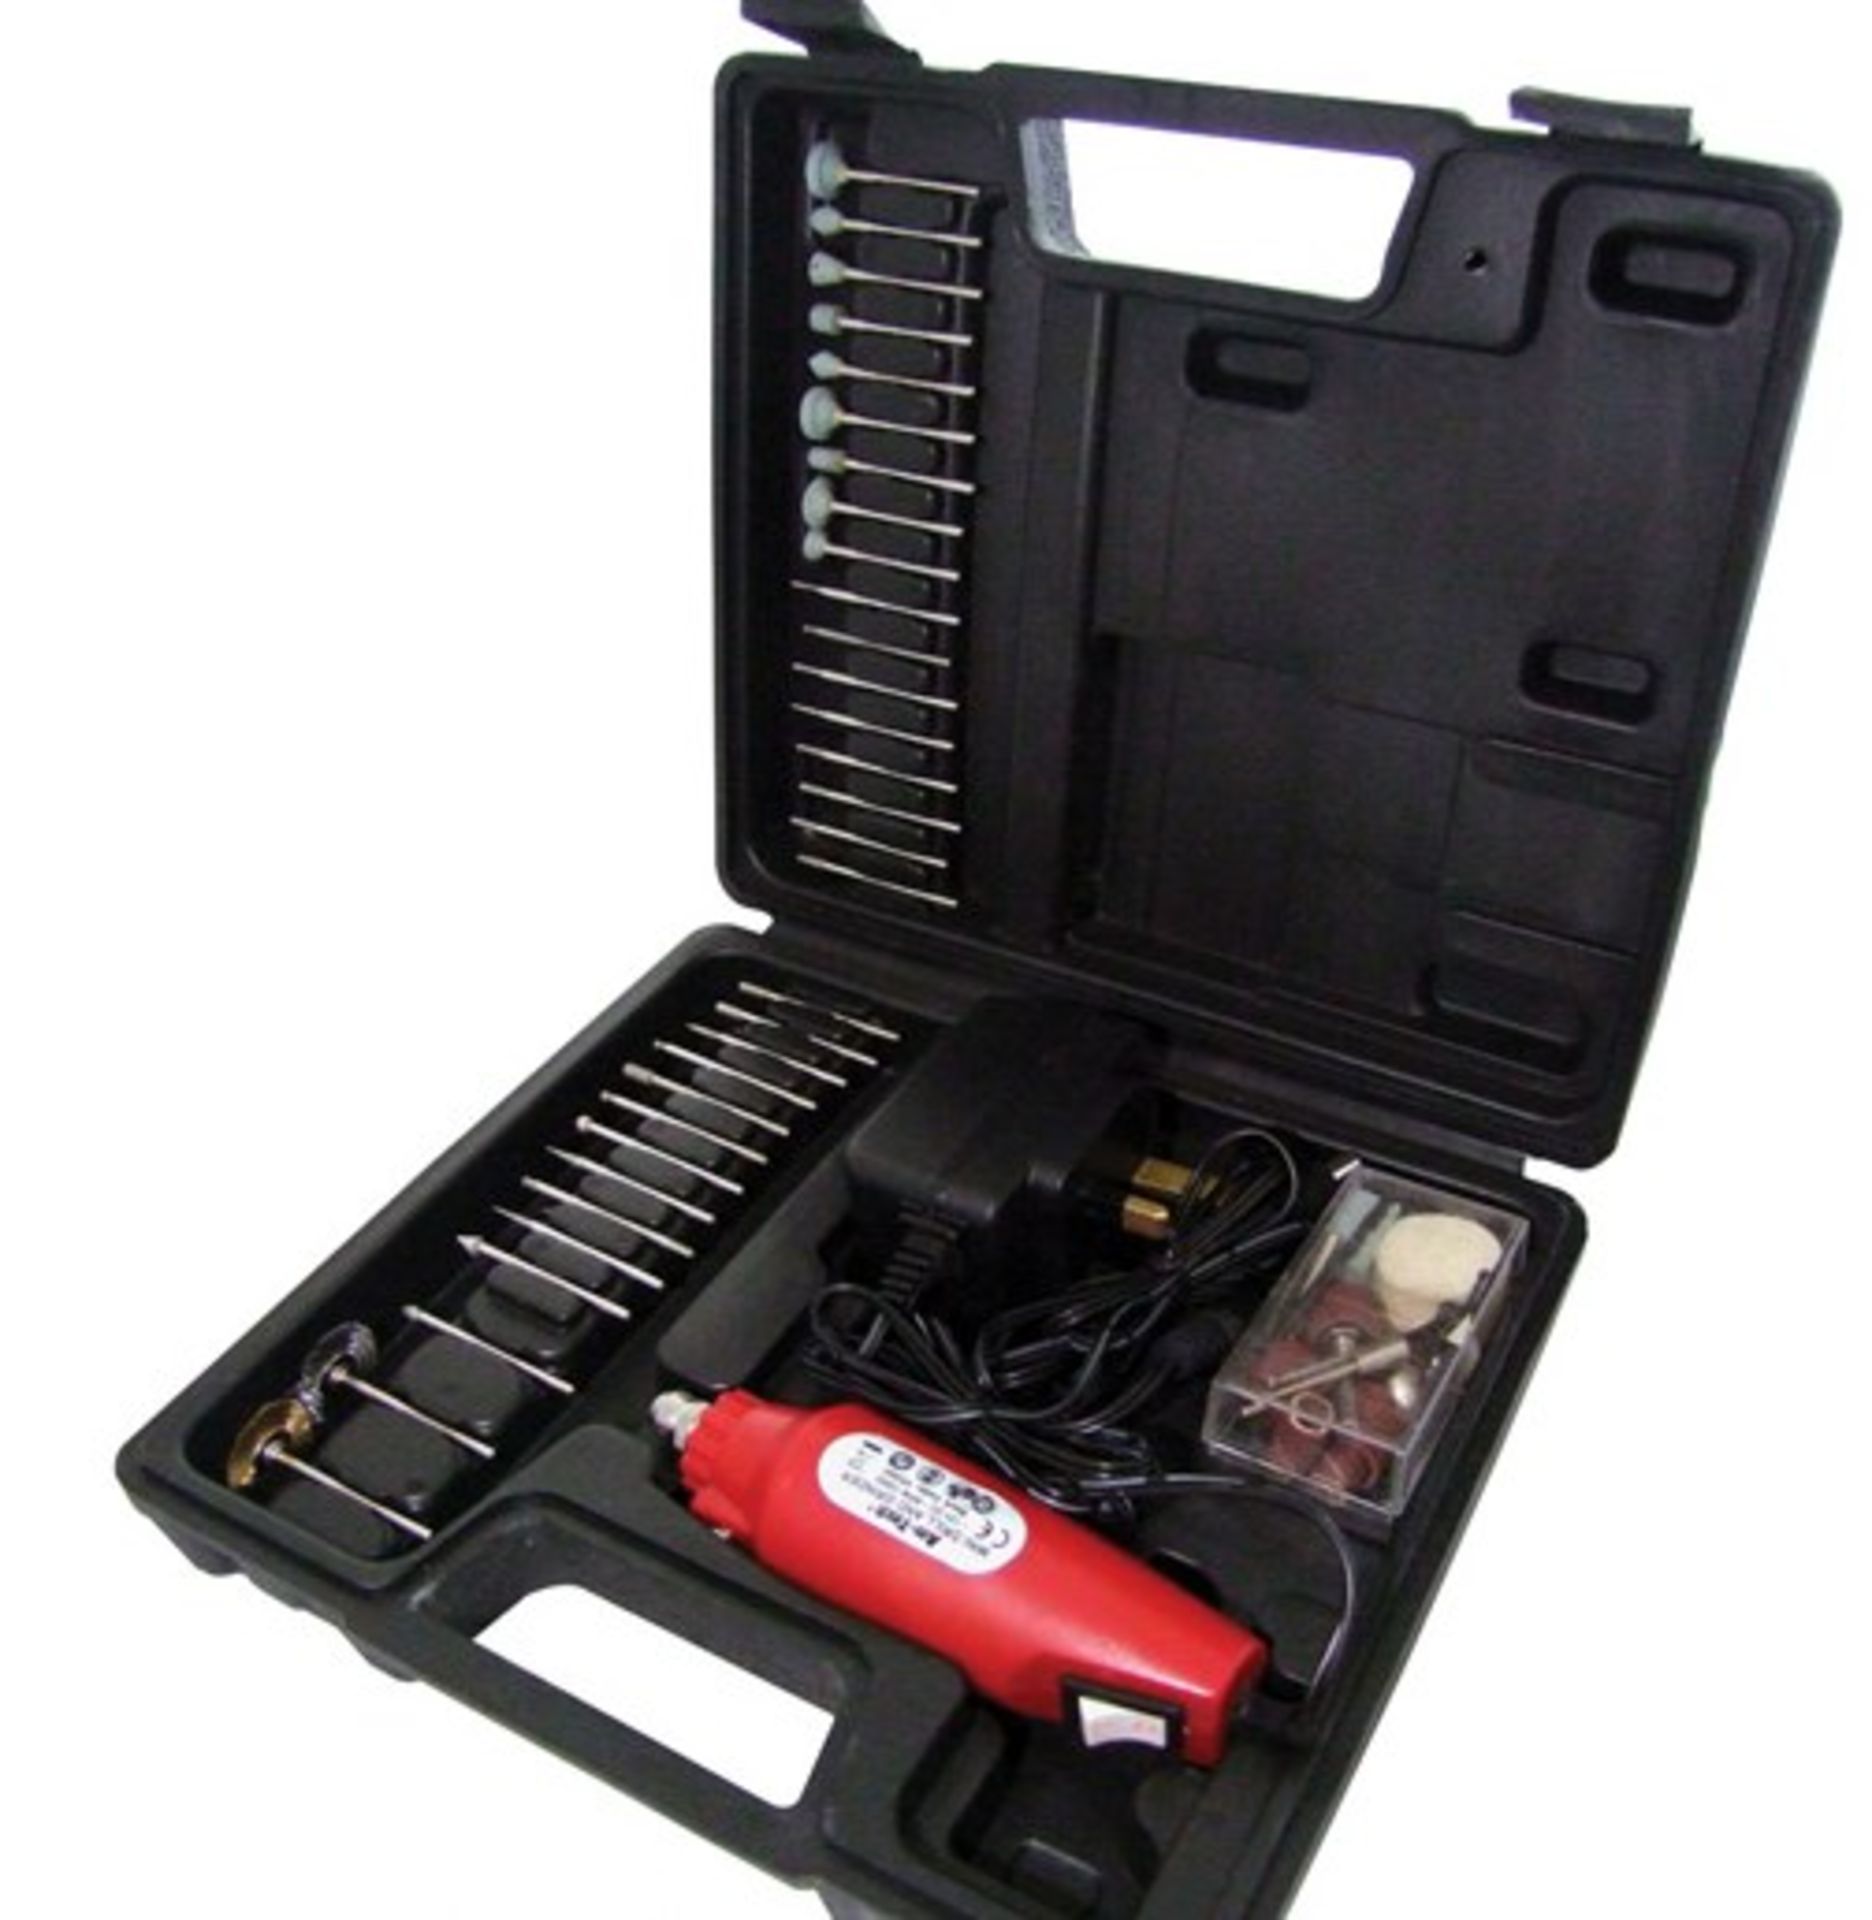 V Brand New Sixty Piece Mini Drill And Grinder Kit X 2 YOUR BID PRICE TO BE MULTIPLIED BY TWO